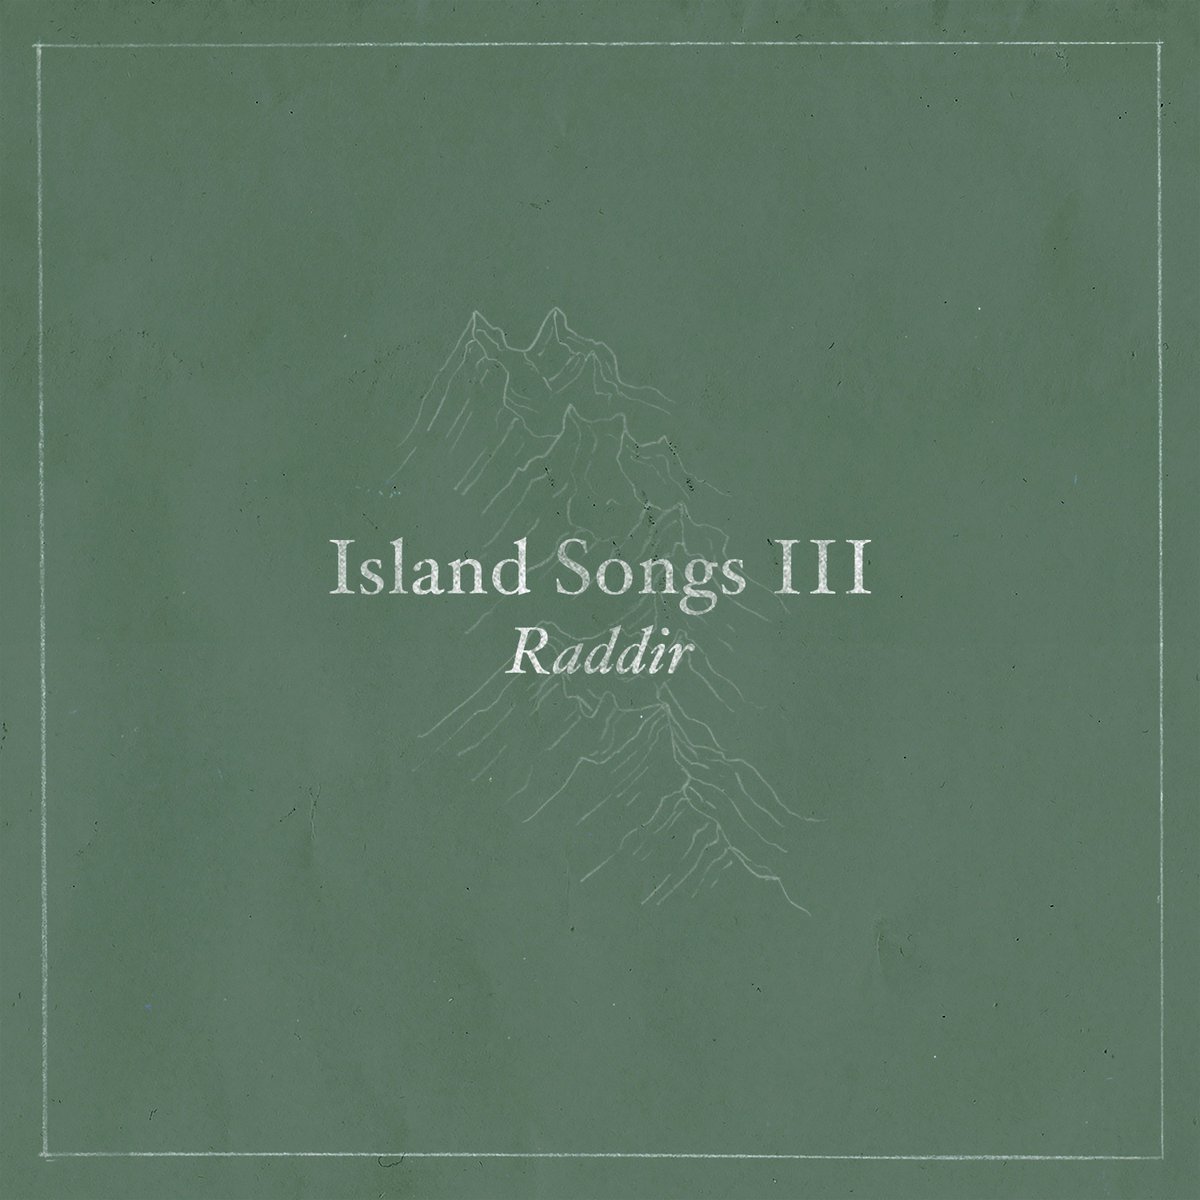 Have you heard the third track from #islandsongs? 
Listen on @Spotify: https://t.co/uwn1UNKDBc https://t.co/tO0nBl9KyY